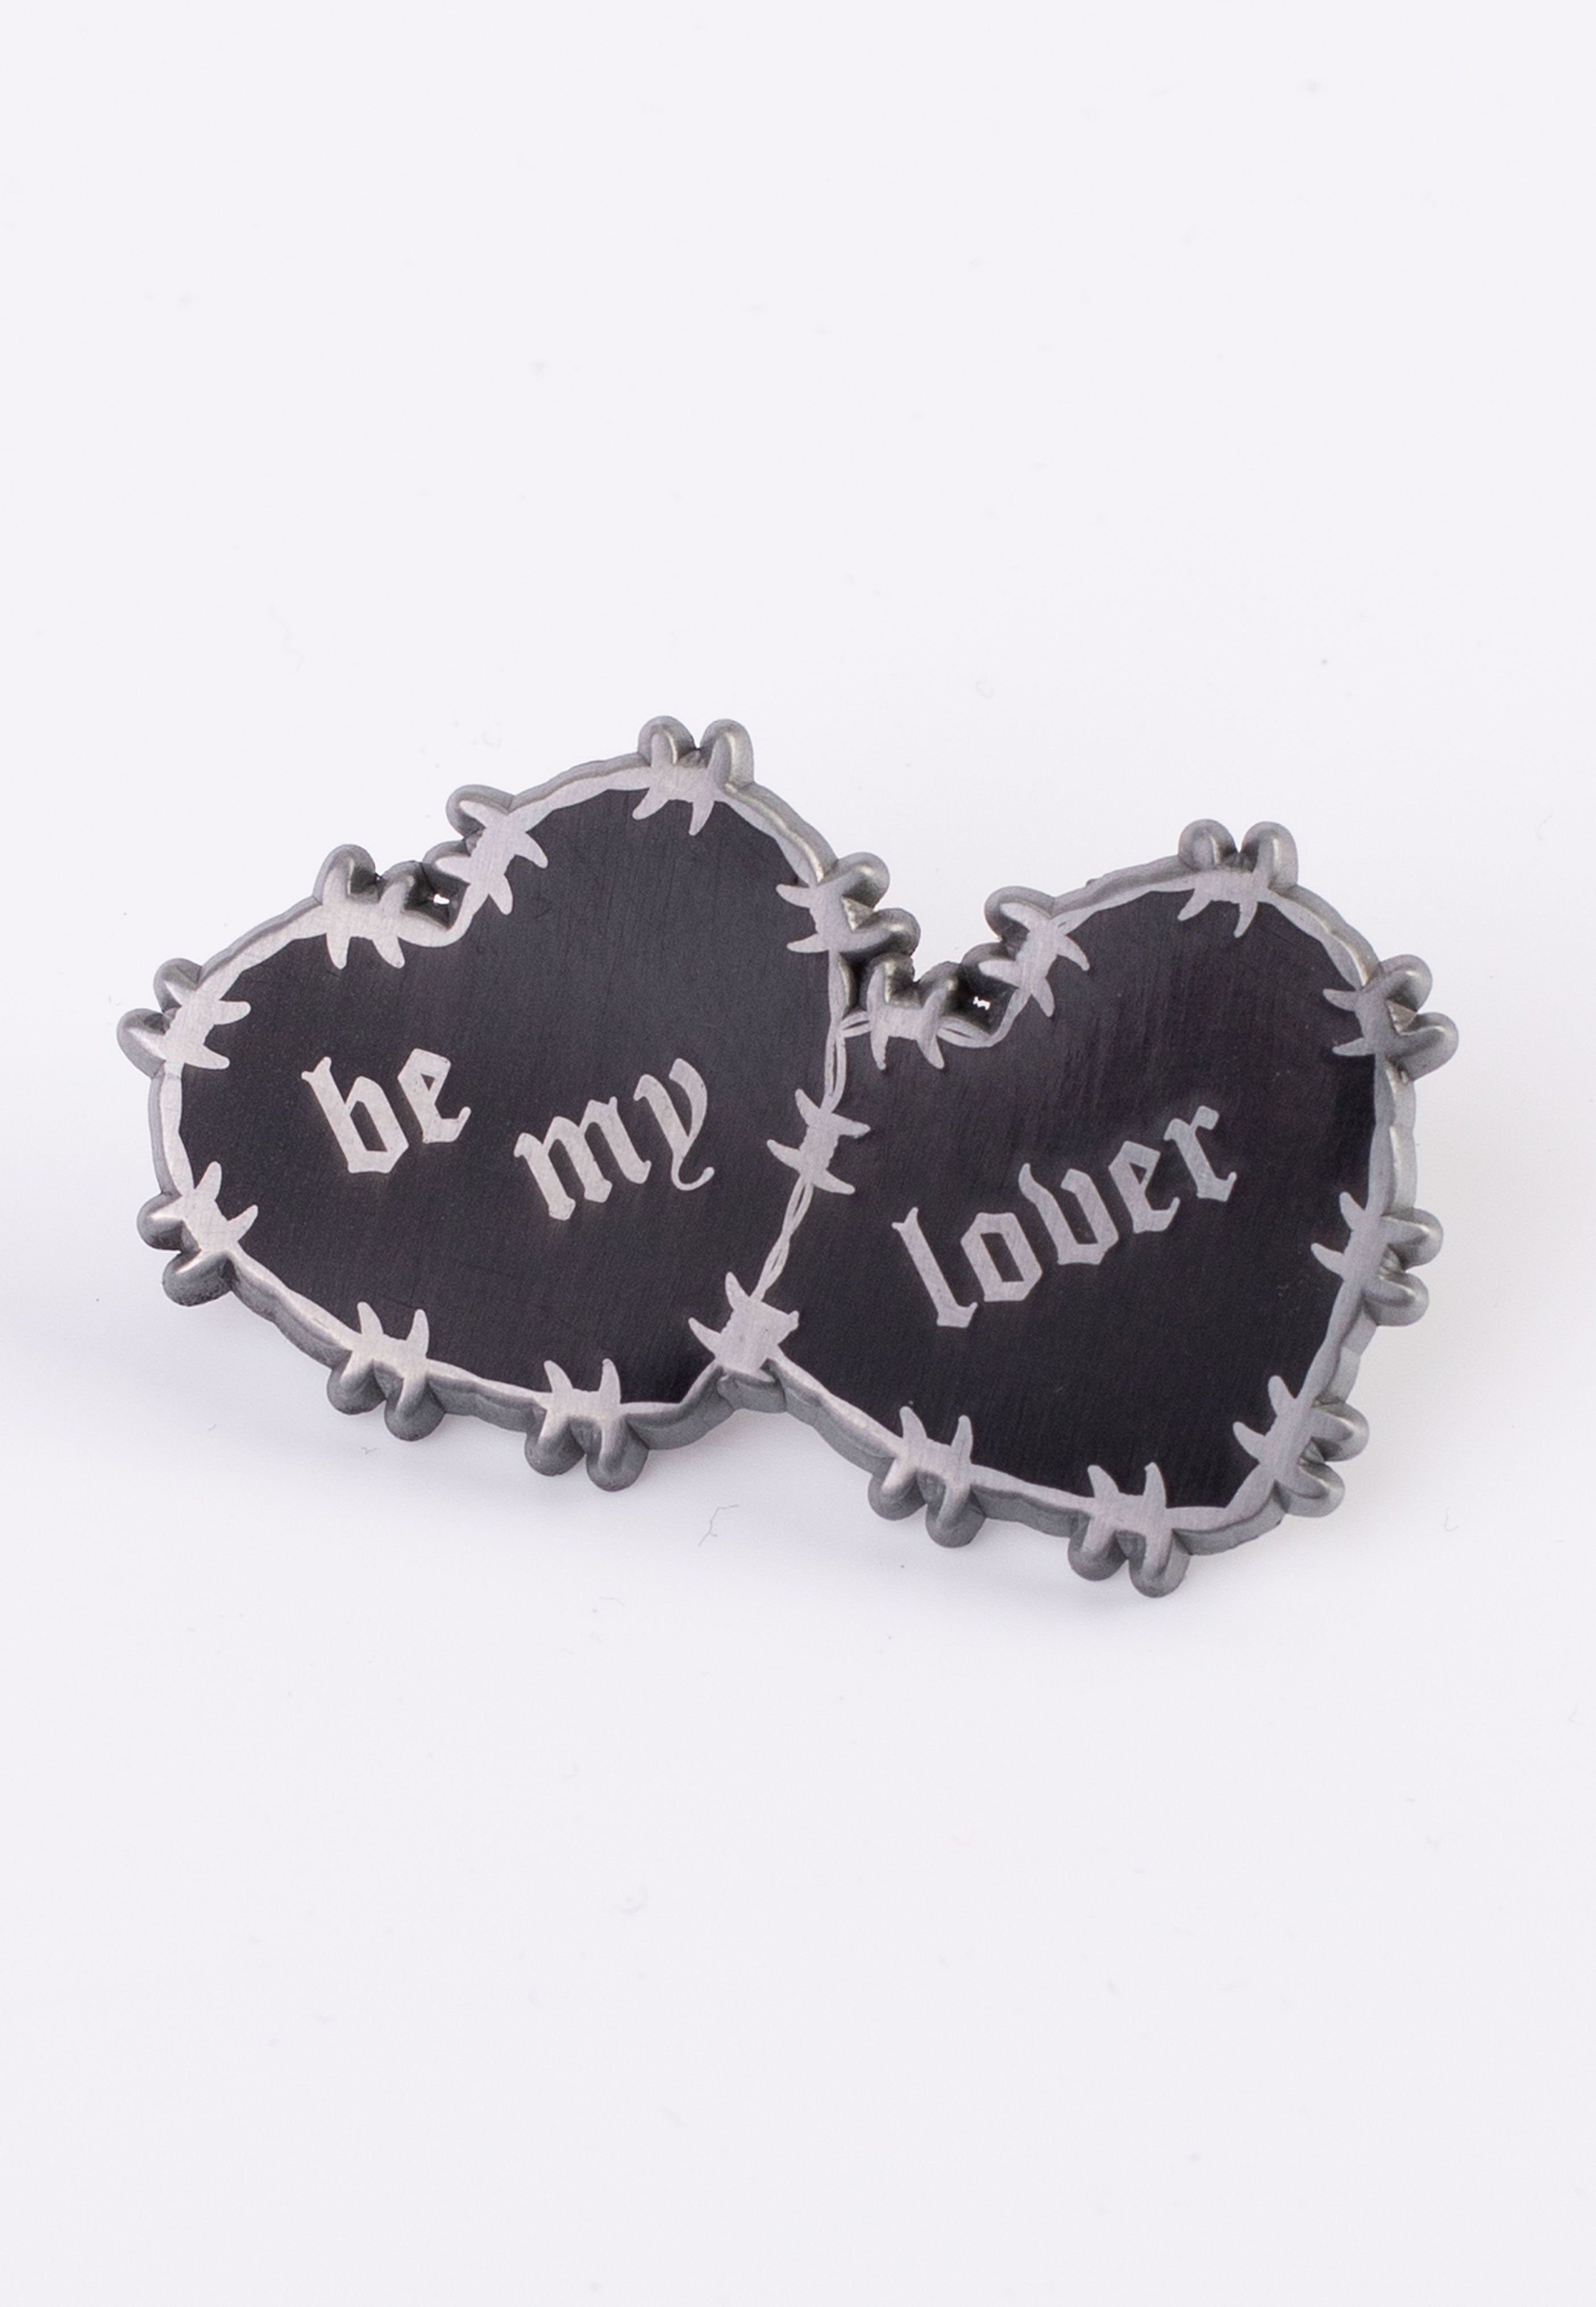 Lively Ghosts - Be My Lover Black - Pin